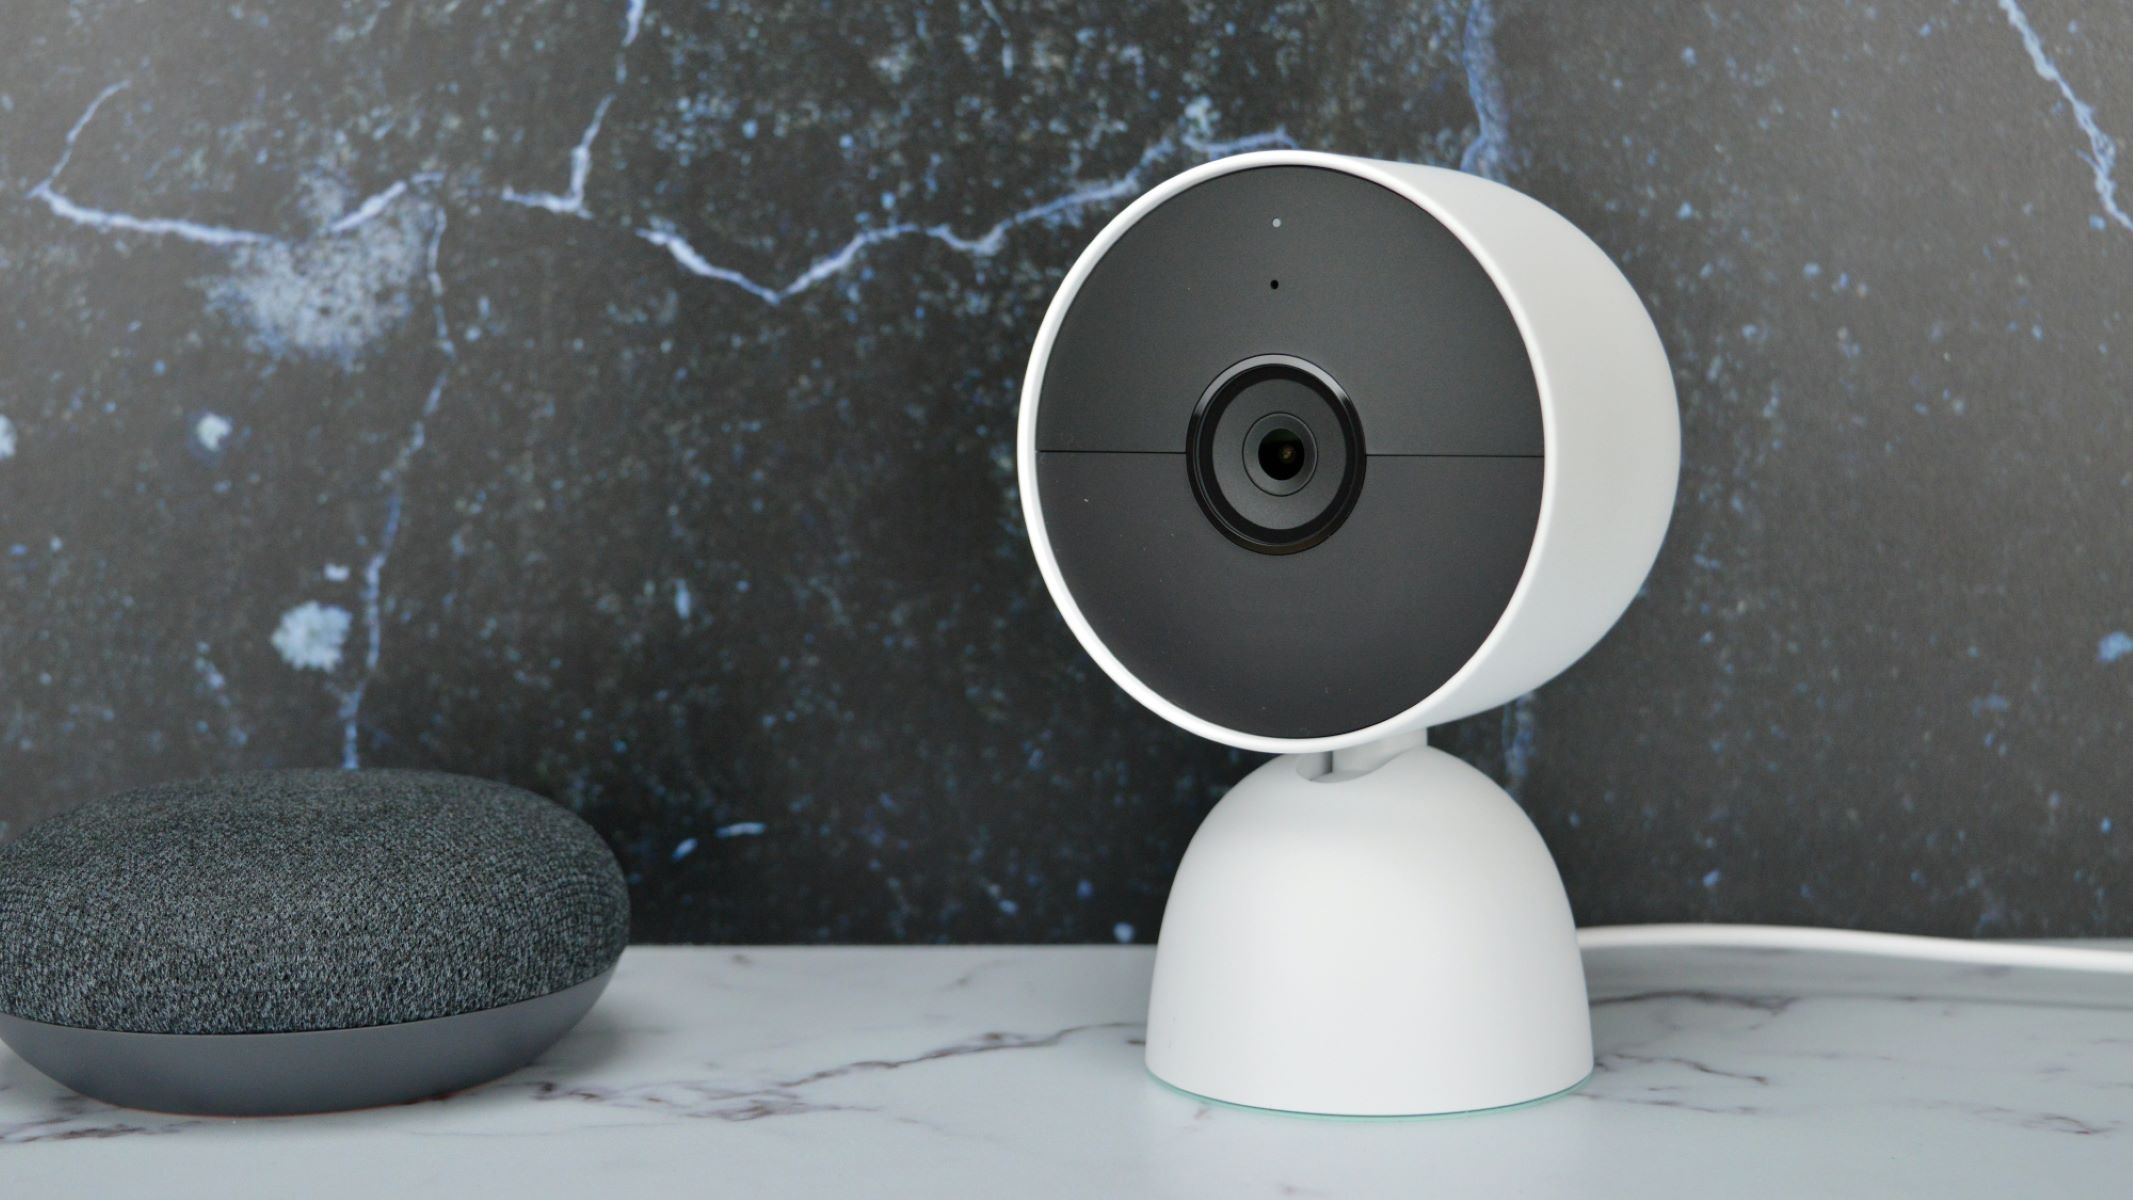 When Does The Nest Outdoor Camera Activate?